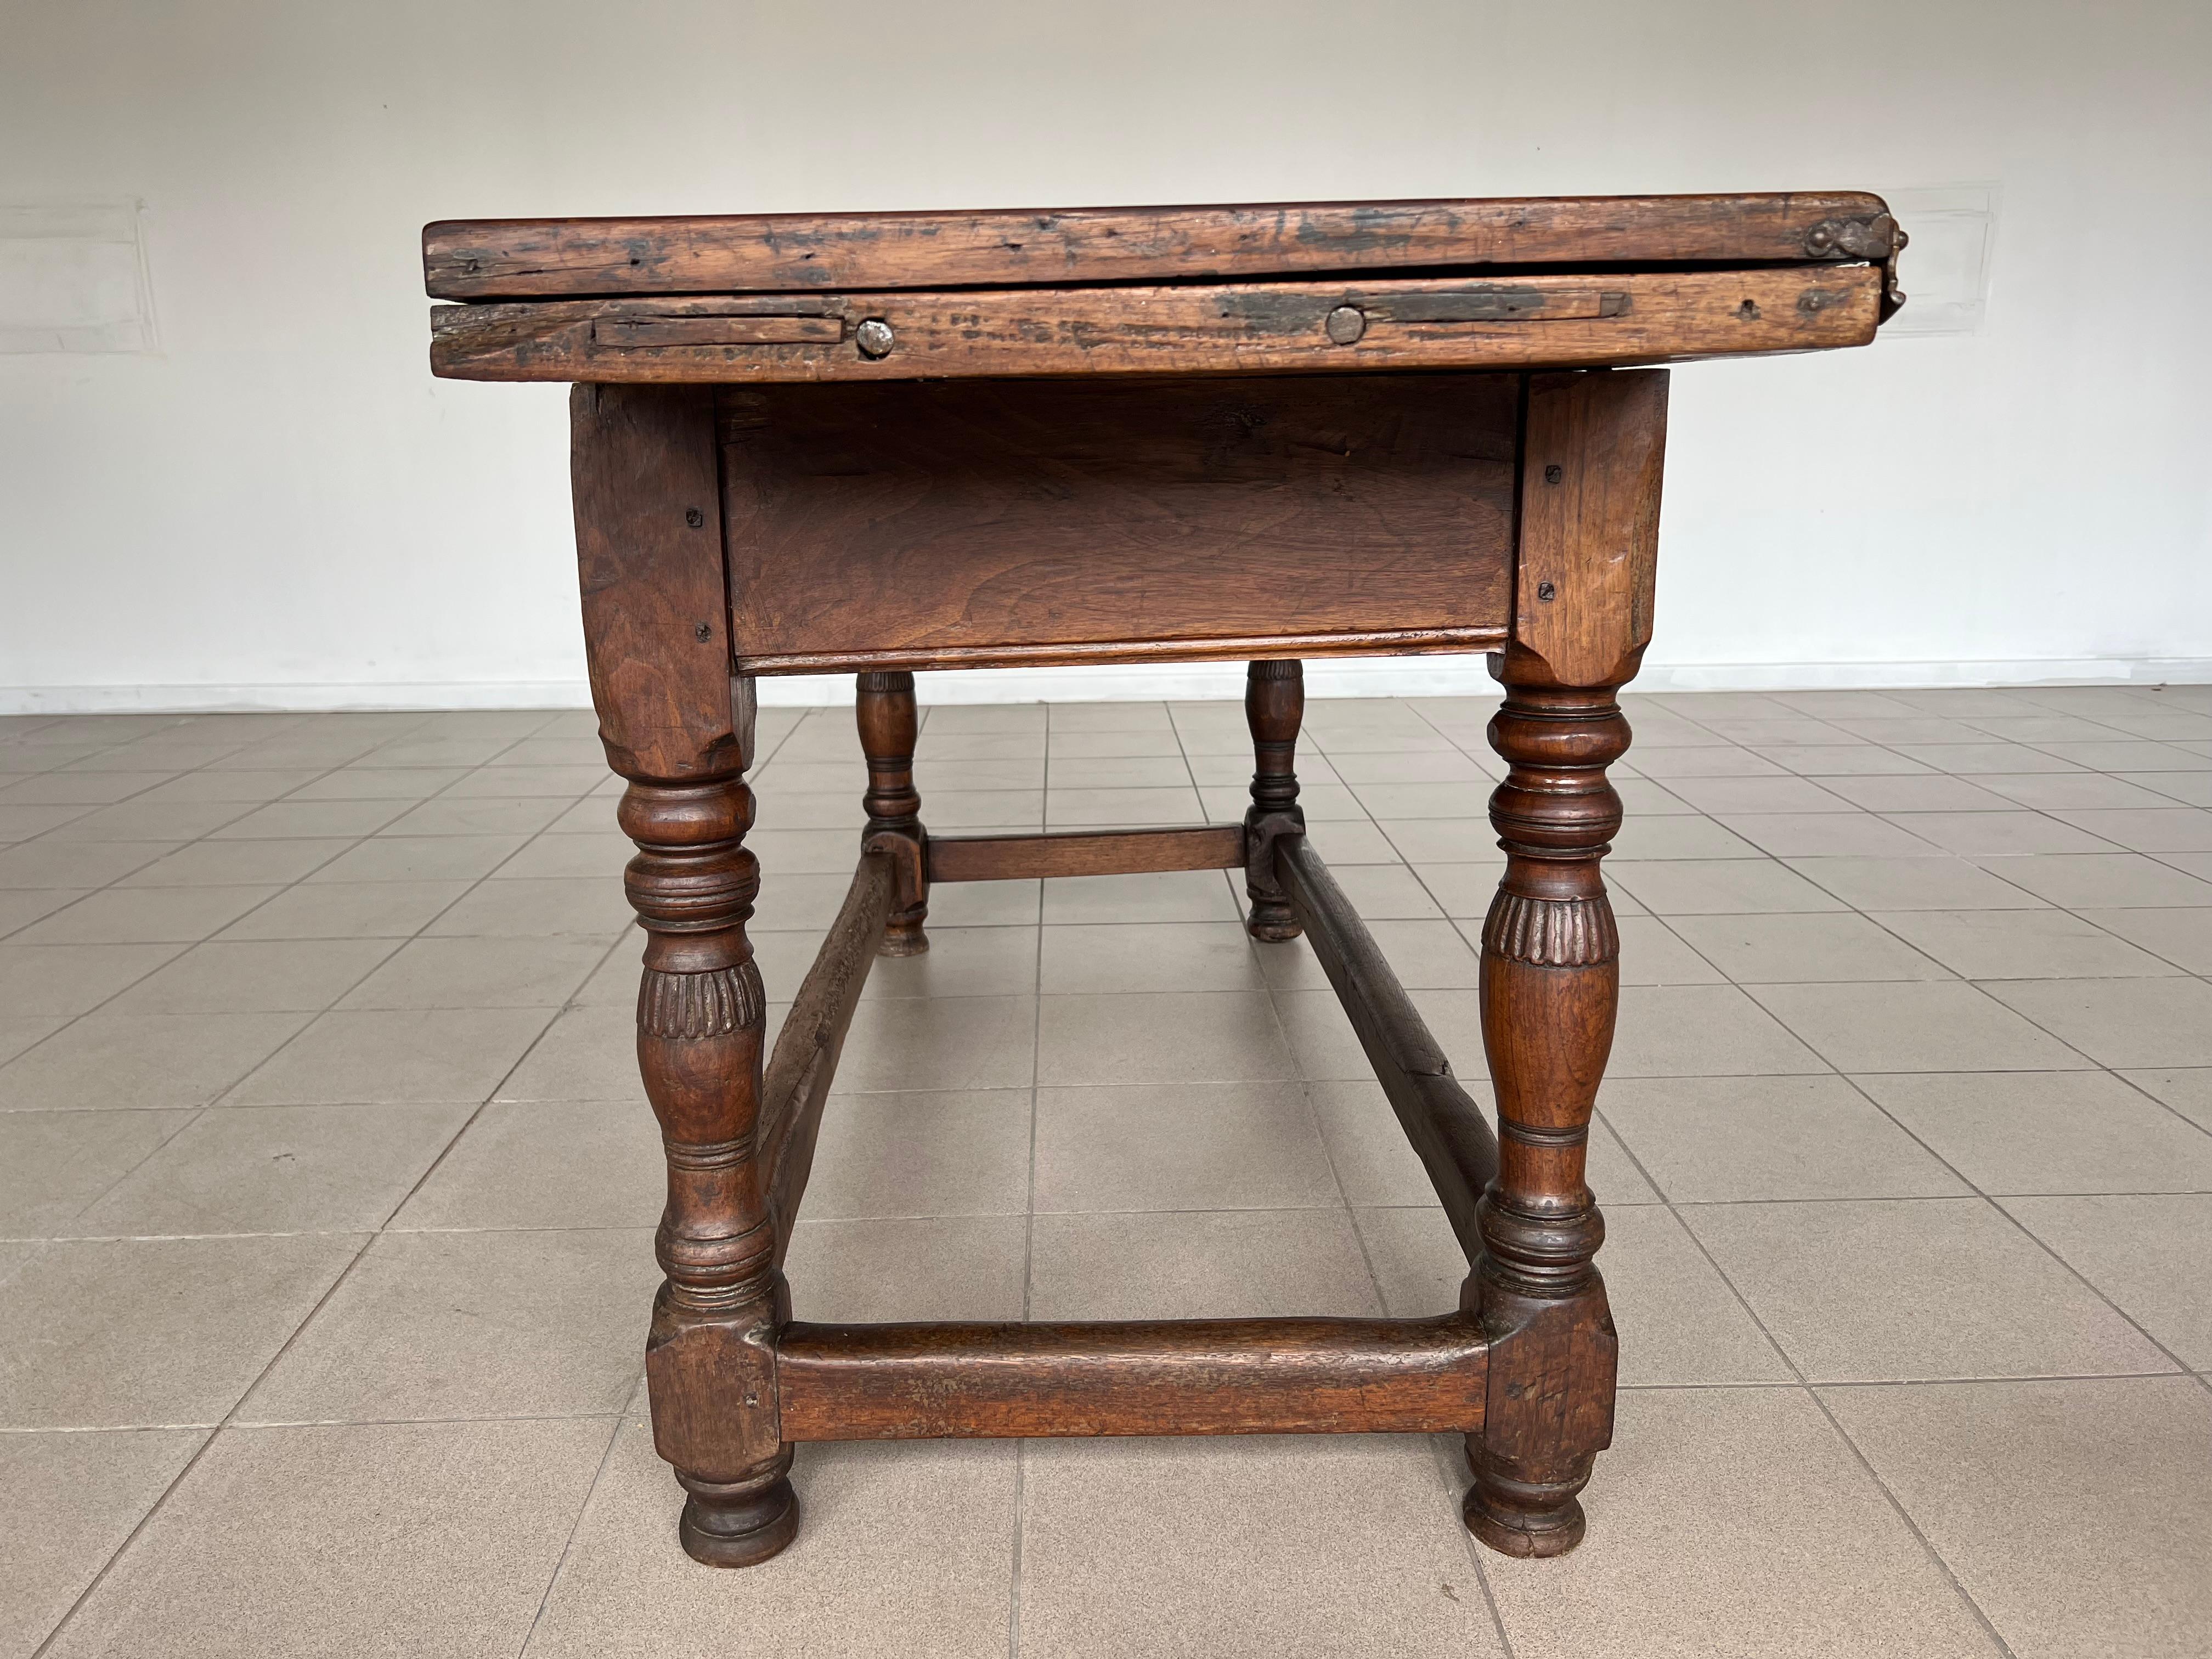 Rare 18c Swiss French Alp Rustic Flip Top Dining Table or Desk With Two Drawers For Sale 4